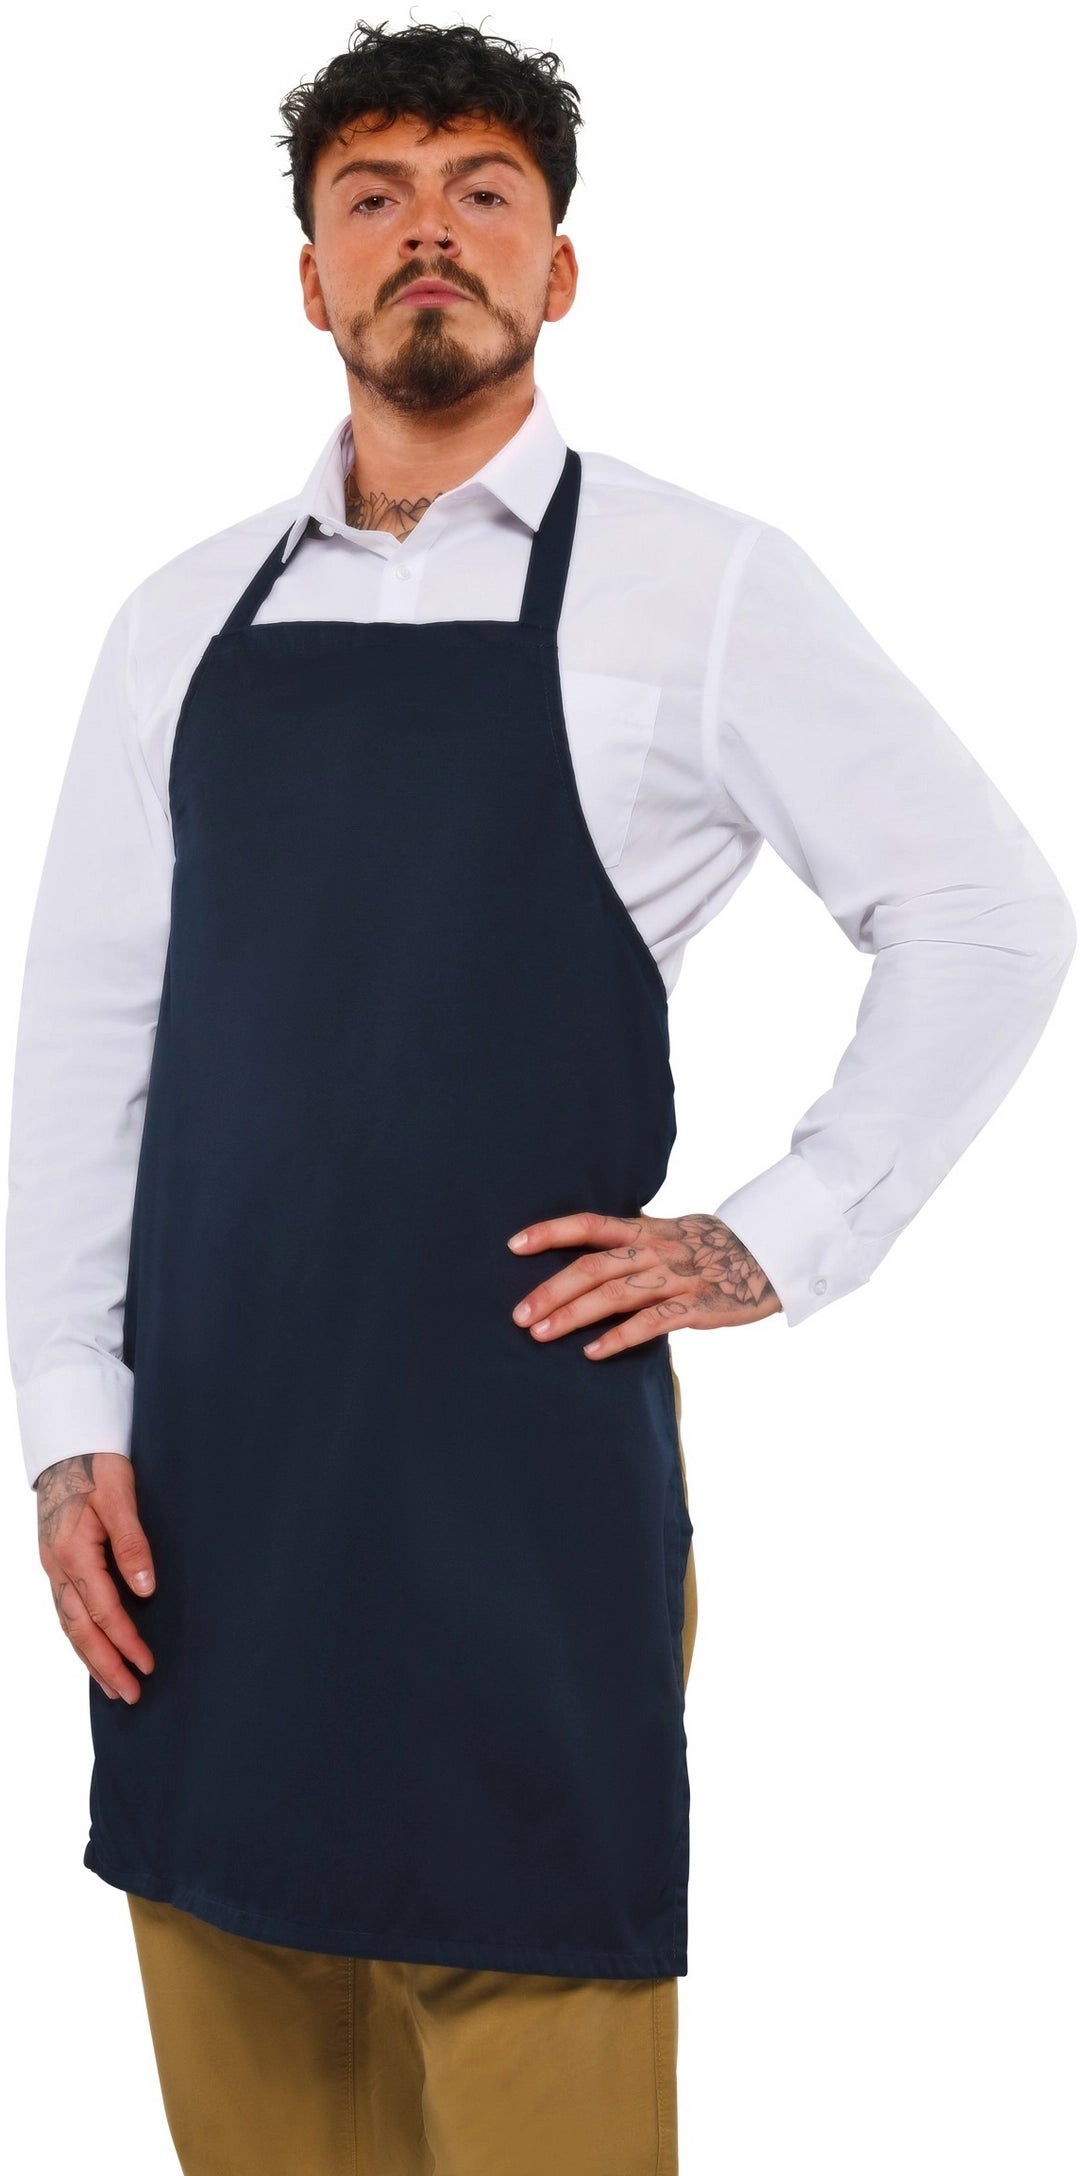 Absolute Apparel AA77 Adult Full Length Apron - COOZO